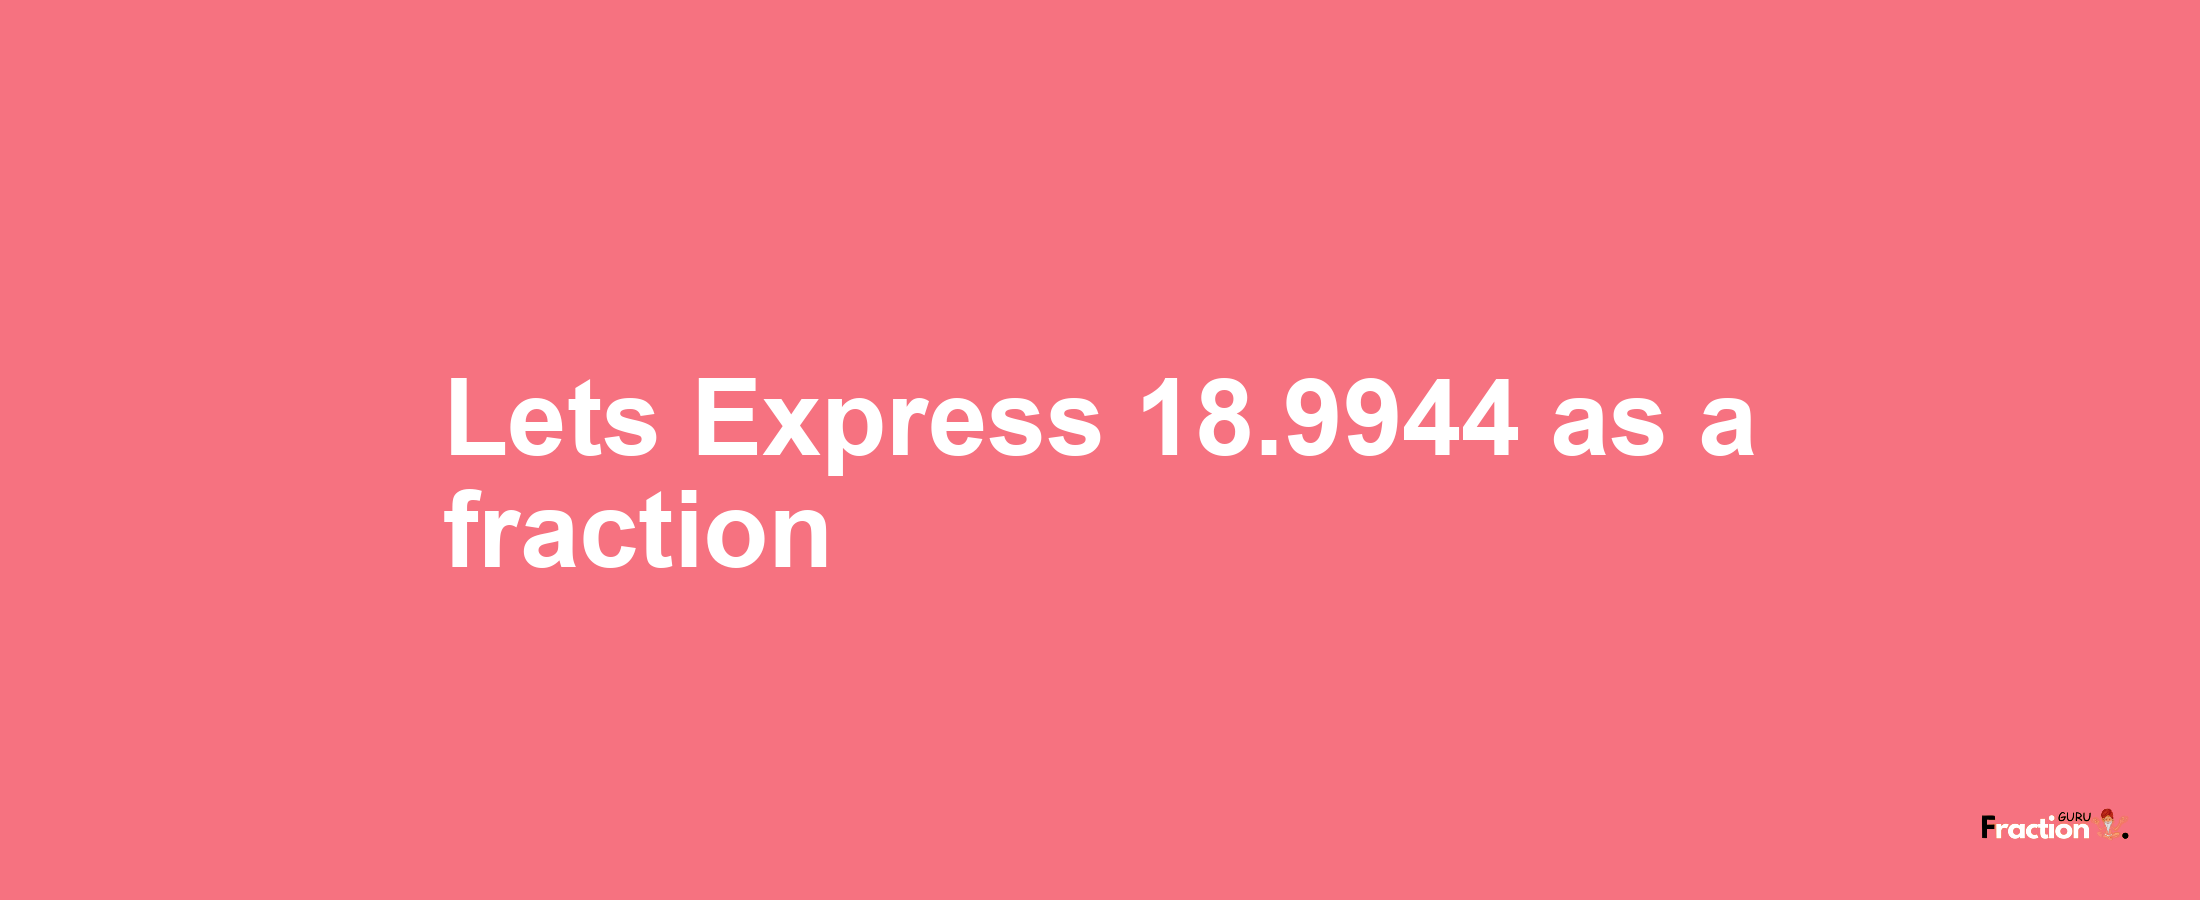 Lets Express 18.9944 as afraction